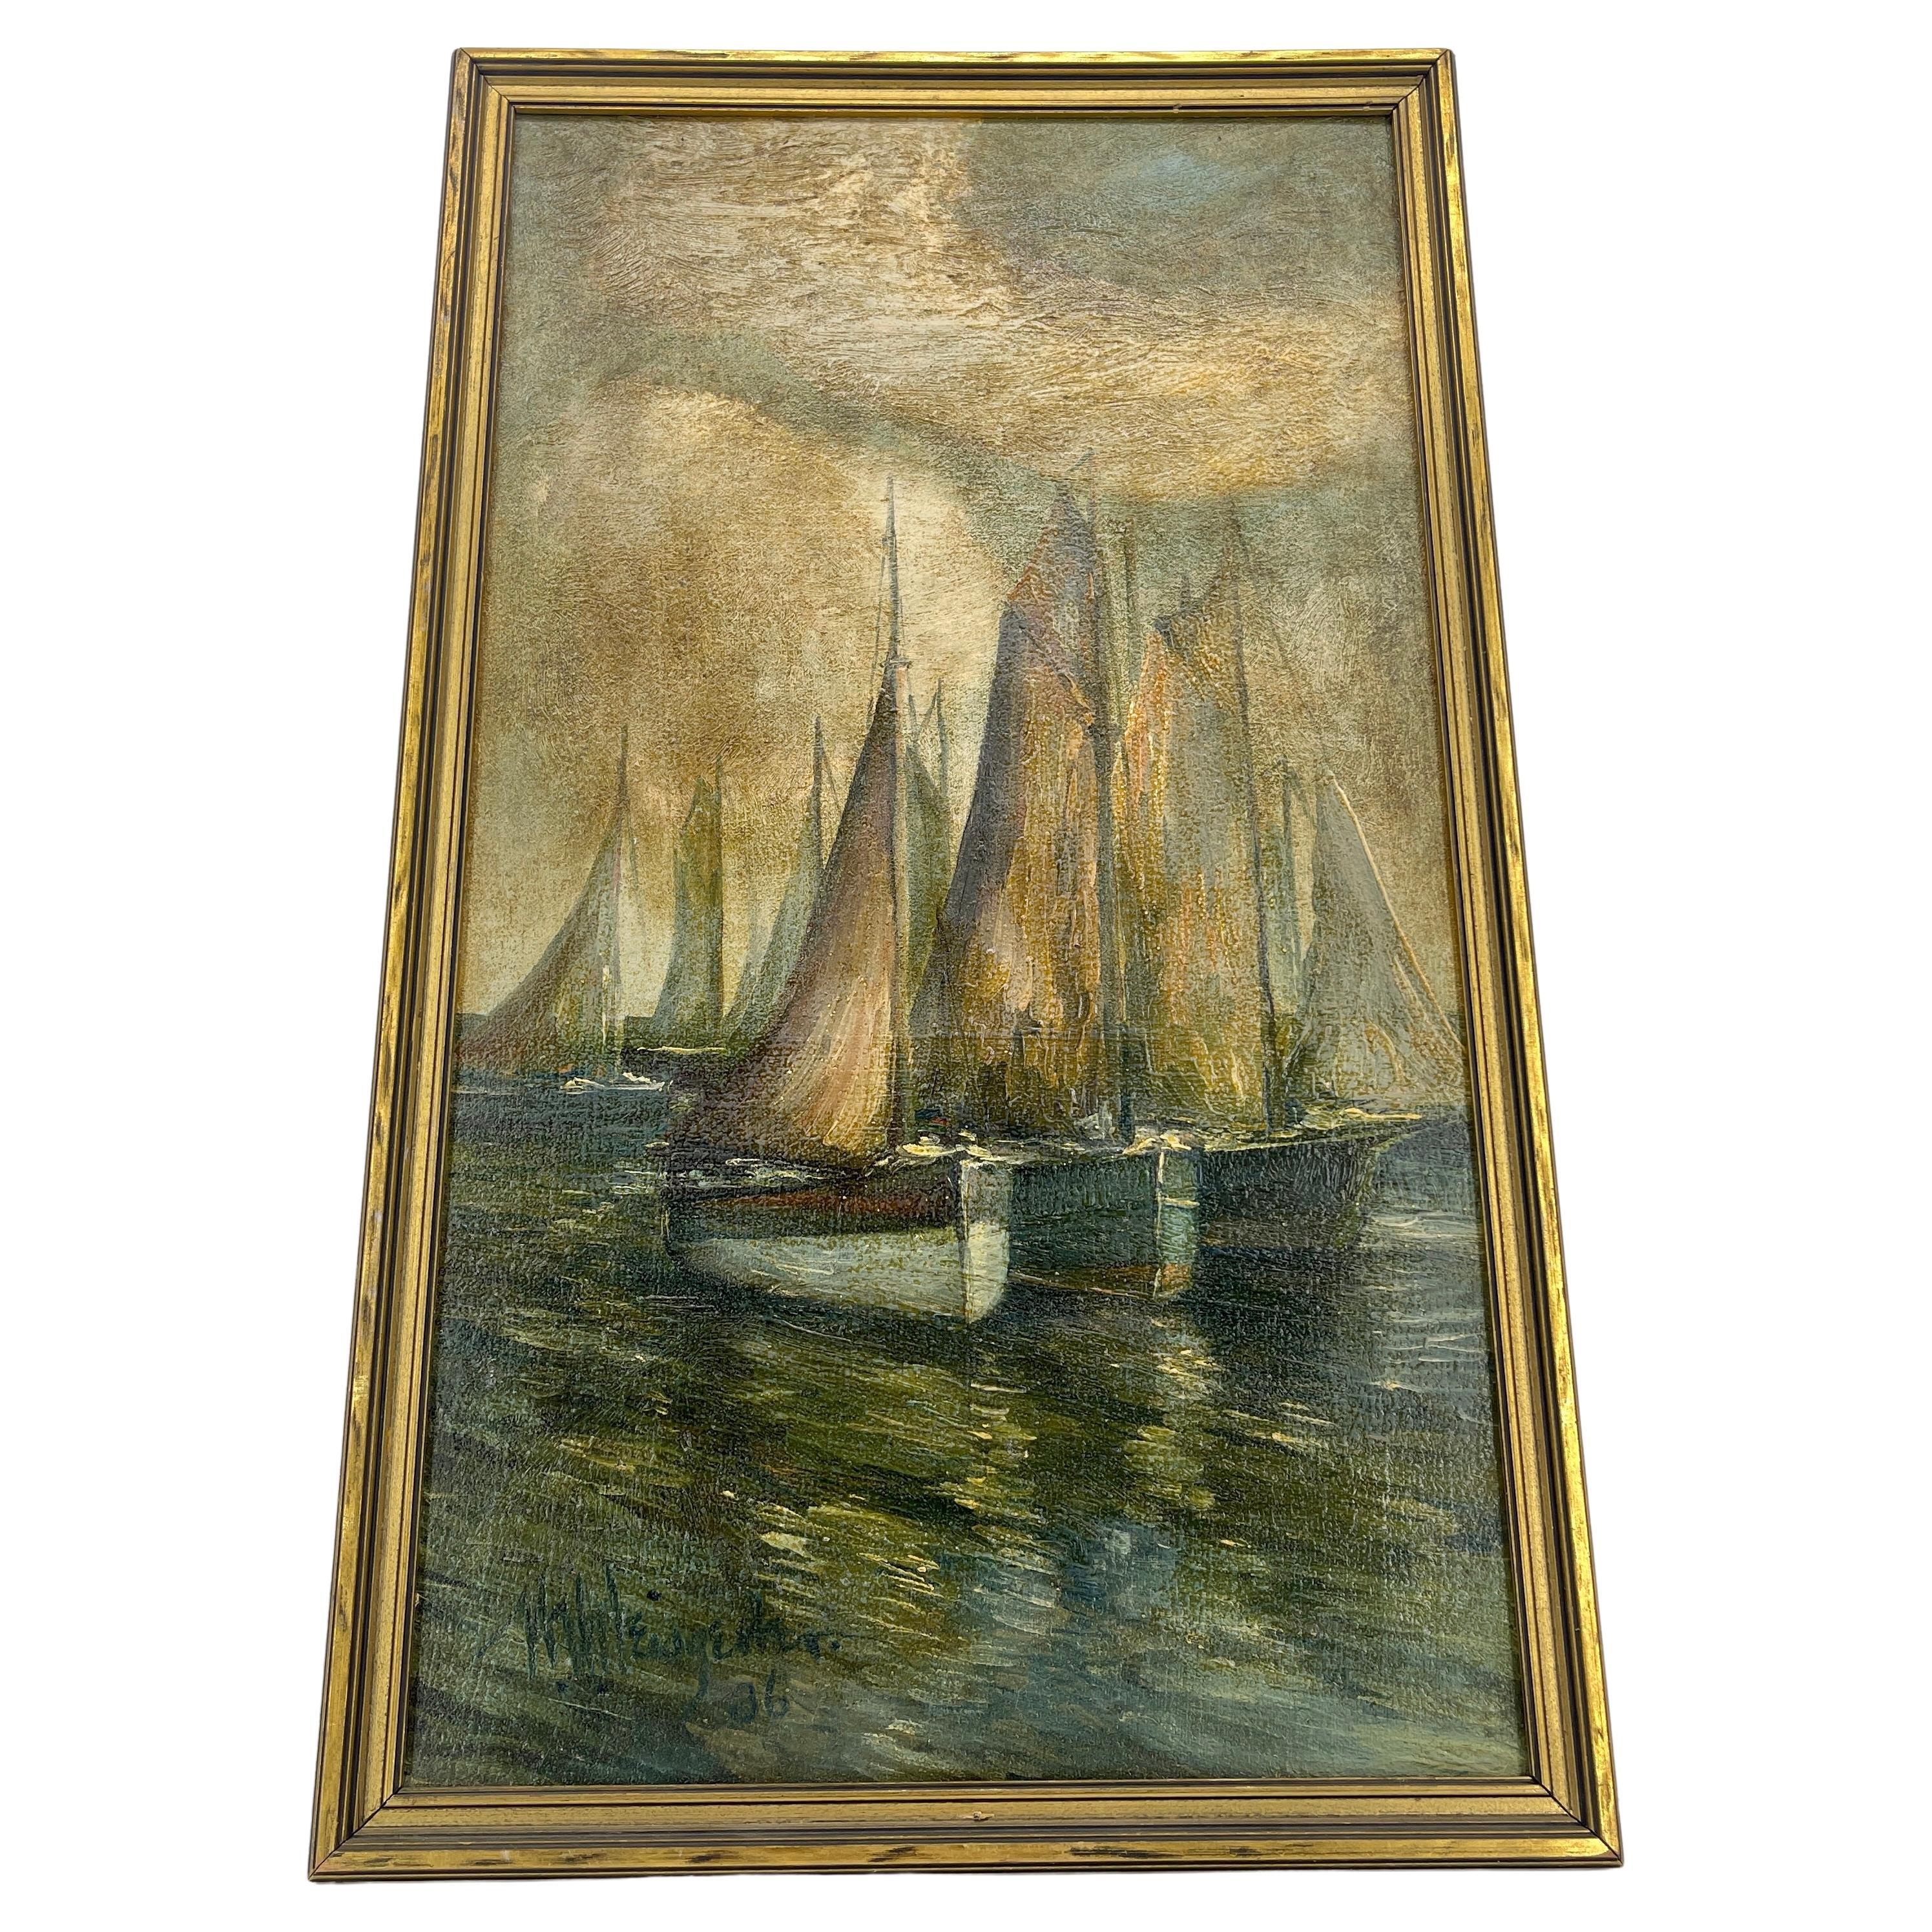 Original Signed Oil Painting on Canvas of Sailboats on Water, dated 1936

This vertically framed signed oil painting is depicting boats on calm water. The warm, neutral colors with a vintage gold wooden frame makes this piece suitable for any home